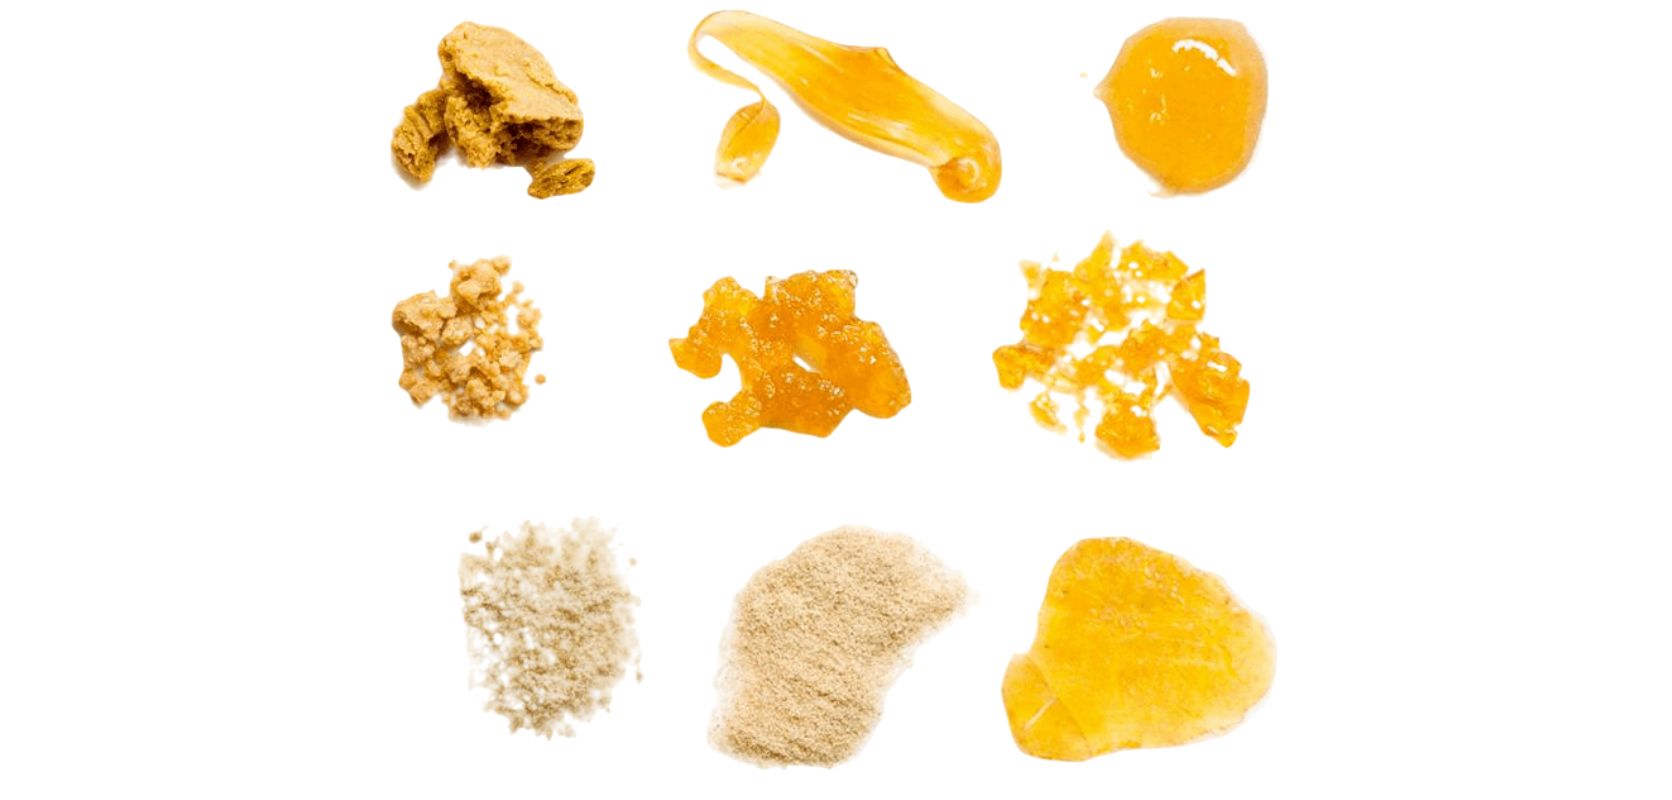 The list of cannabis concentrates is endless. Since marijuana became legal in Canada, researchers have been coming up with the most creative forms of cannabis. 